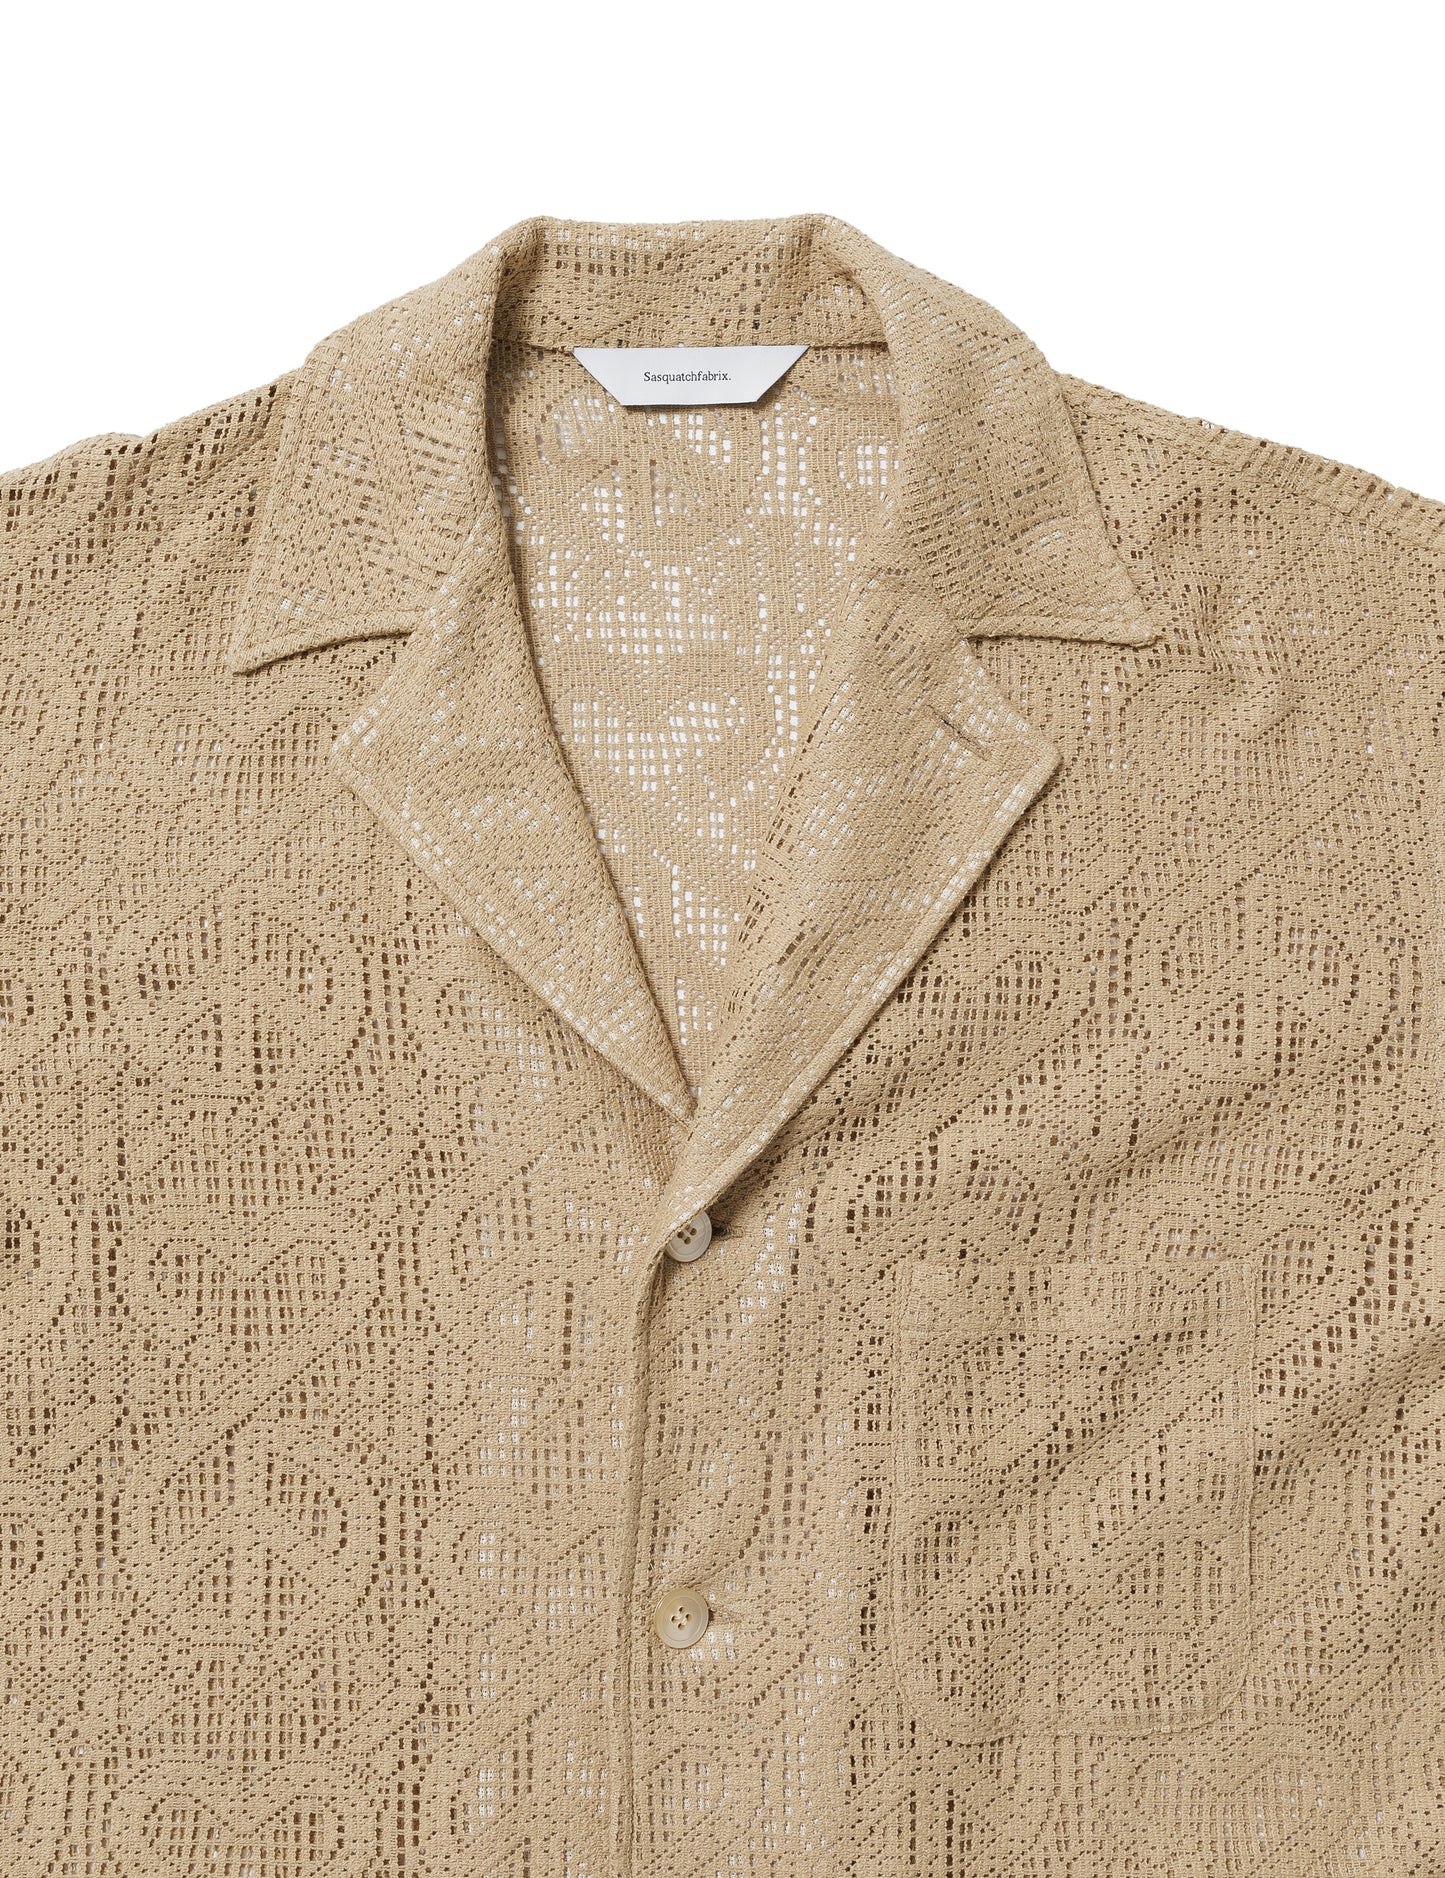 24SS-SY9-009 / “LOVE & PEACE” LACE LAPEL JACKET / OIL YELLOW